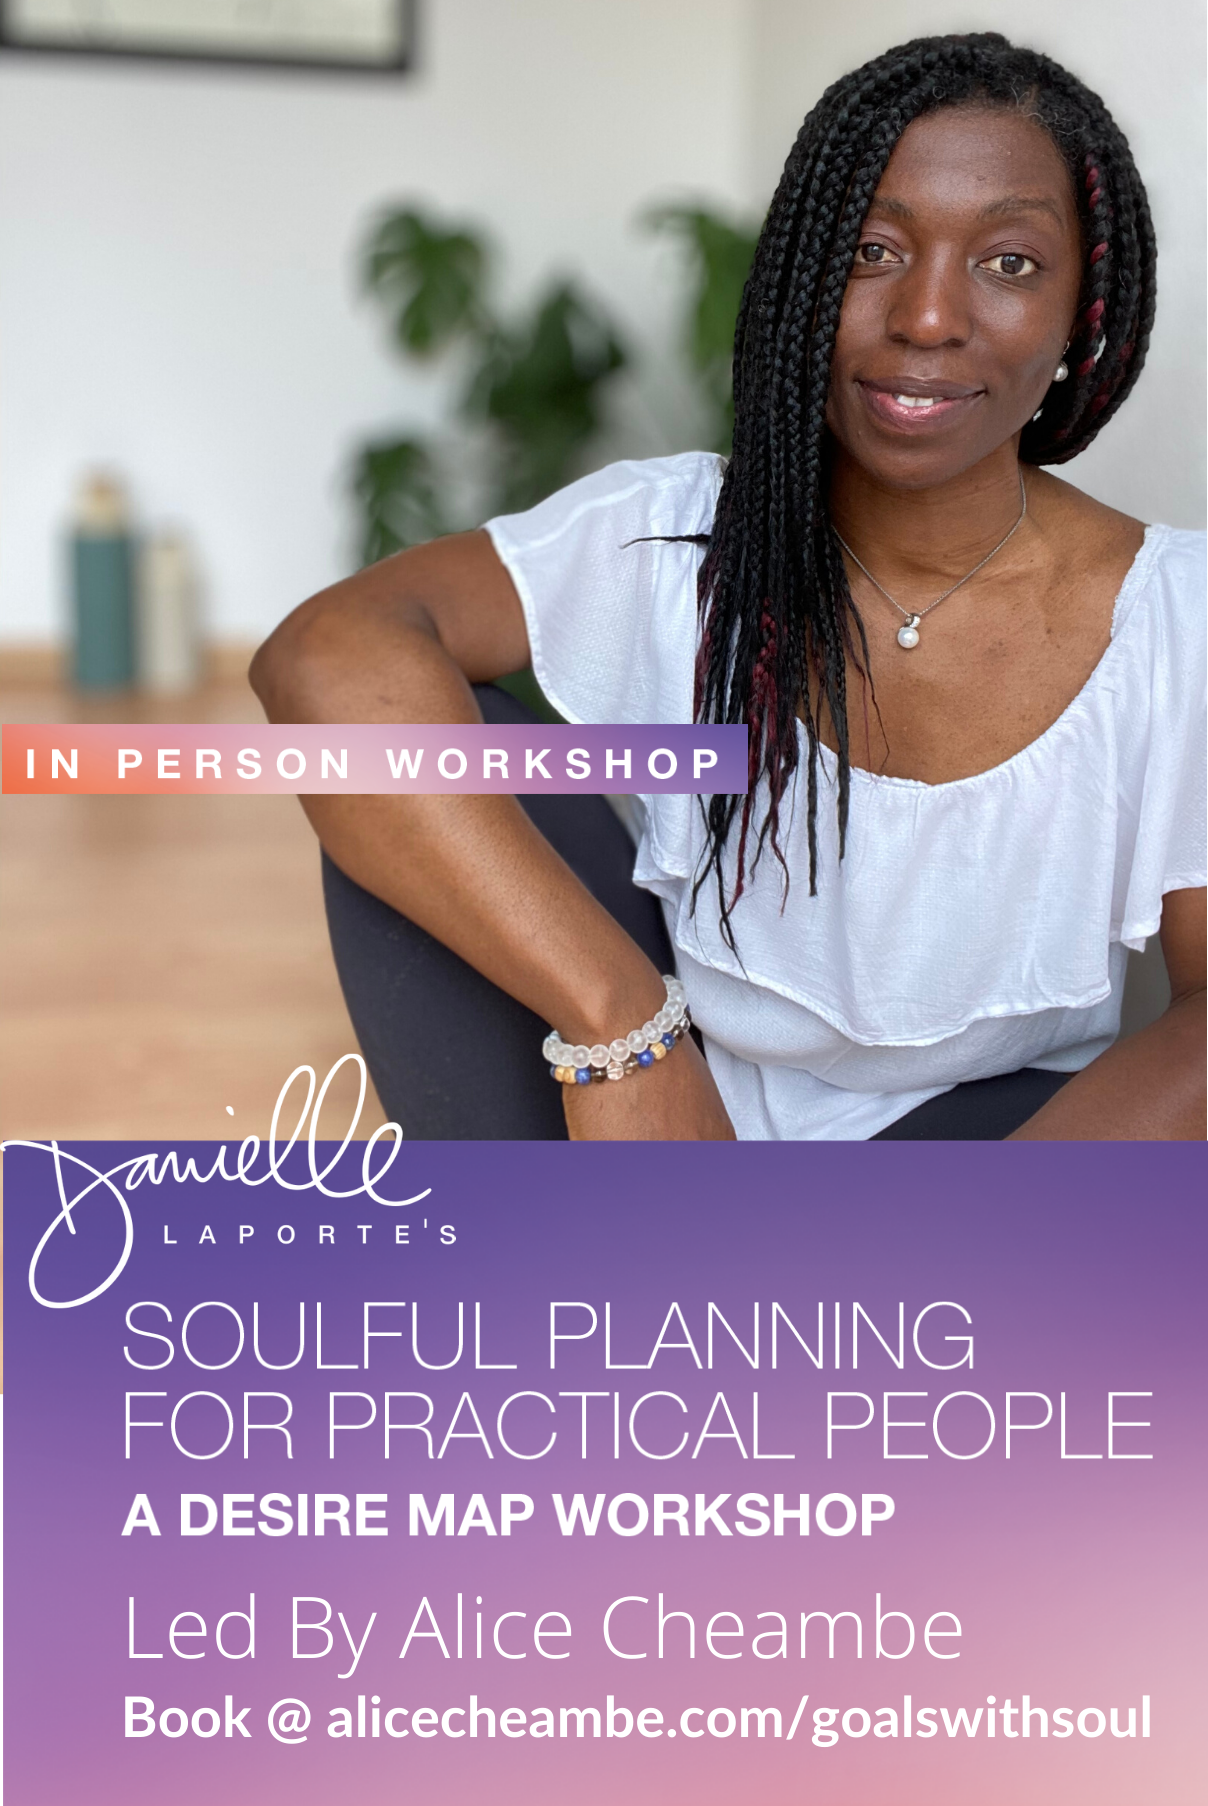 Soul Planning - A Desire Map Workshop - Led By Alice Cheambe